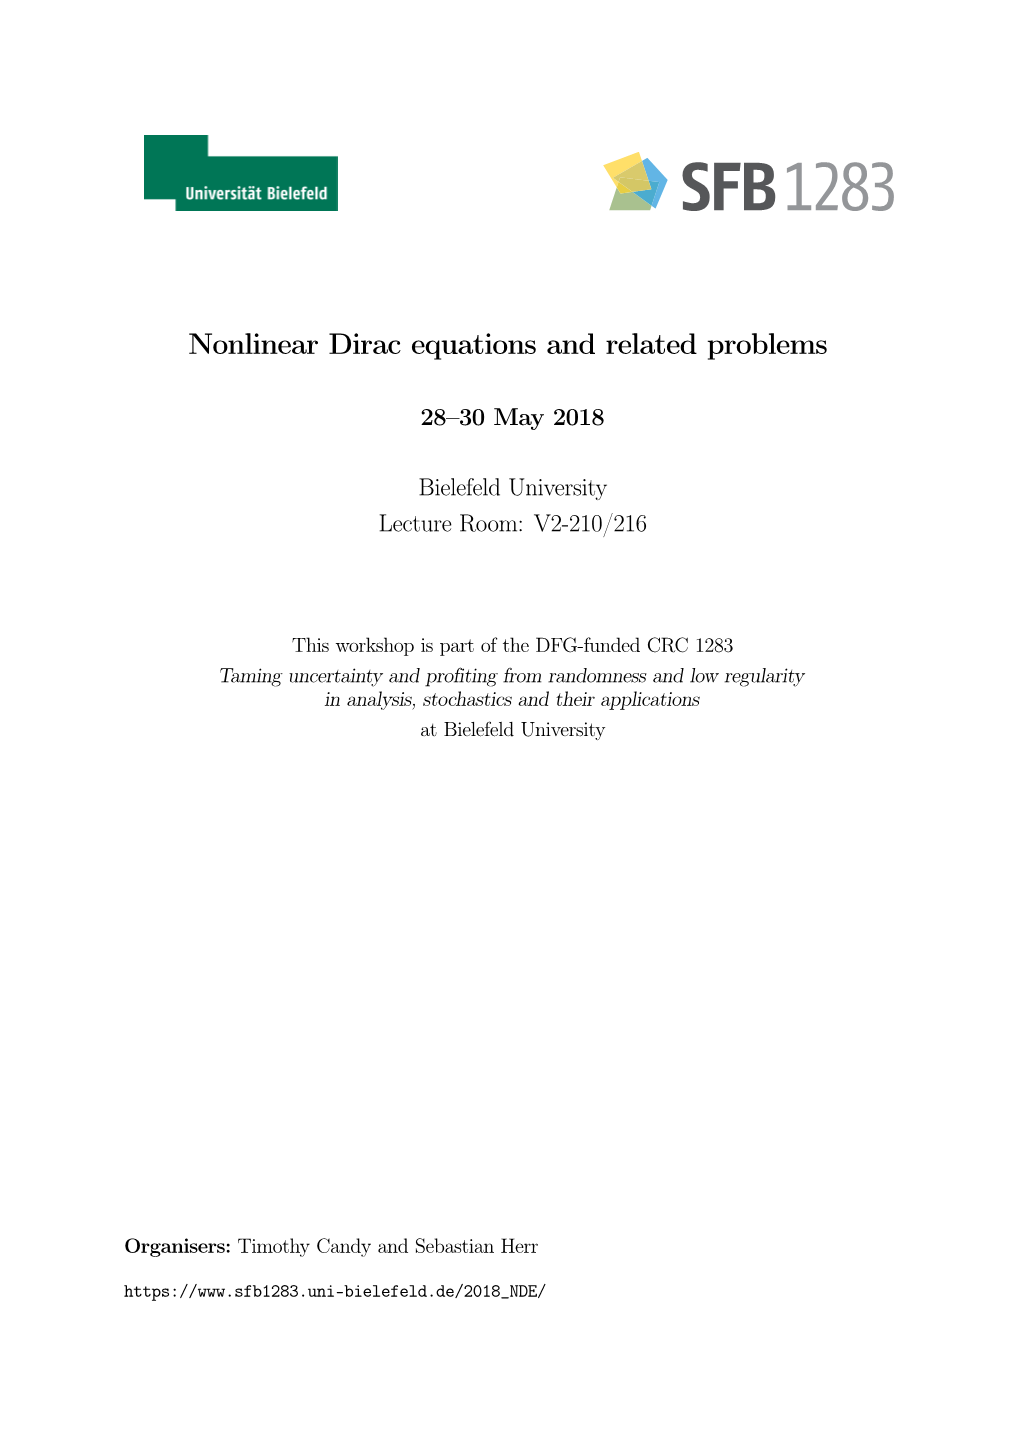 Nonlinear Dirac Equations and Related Problems